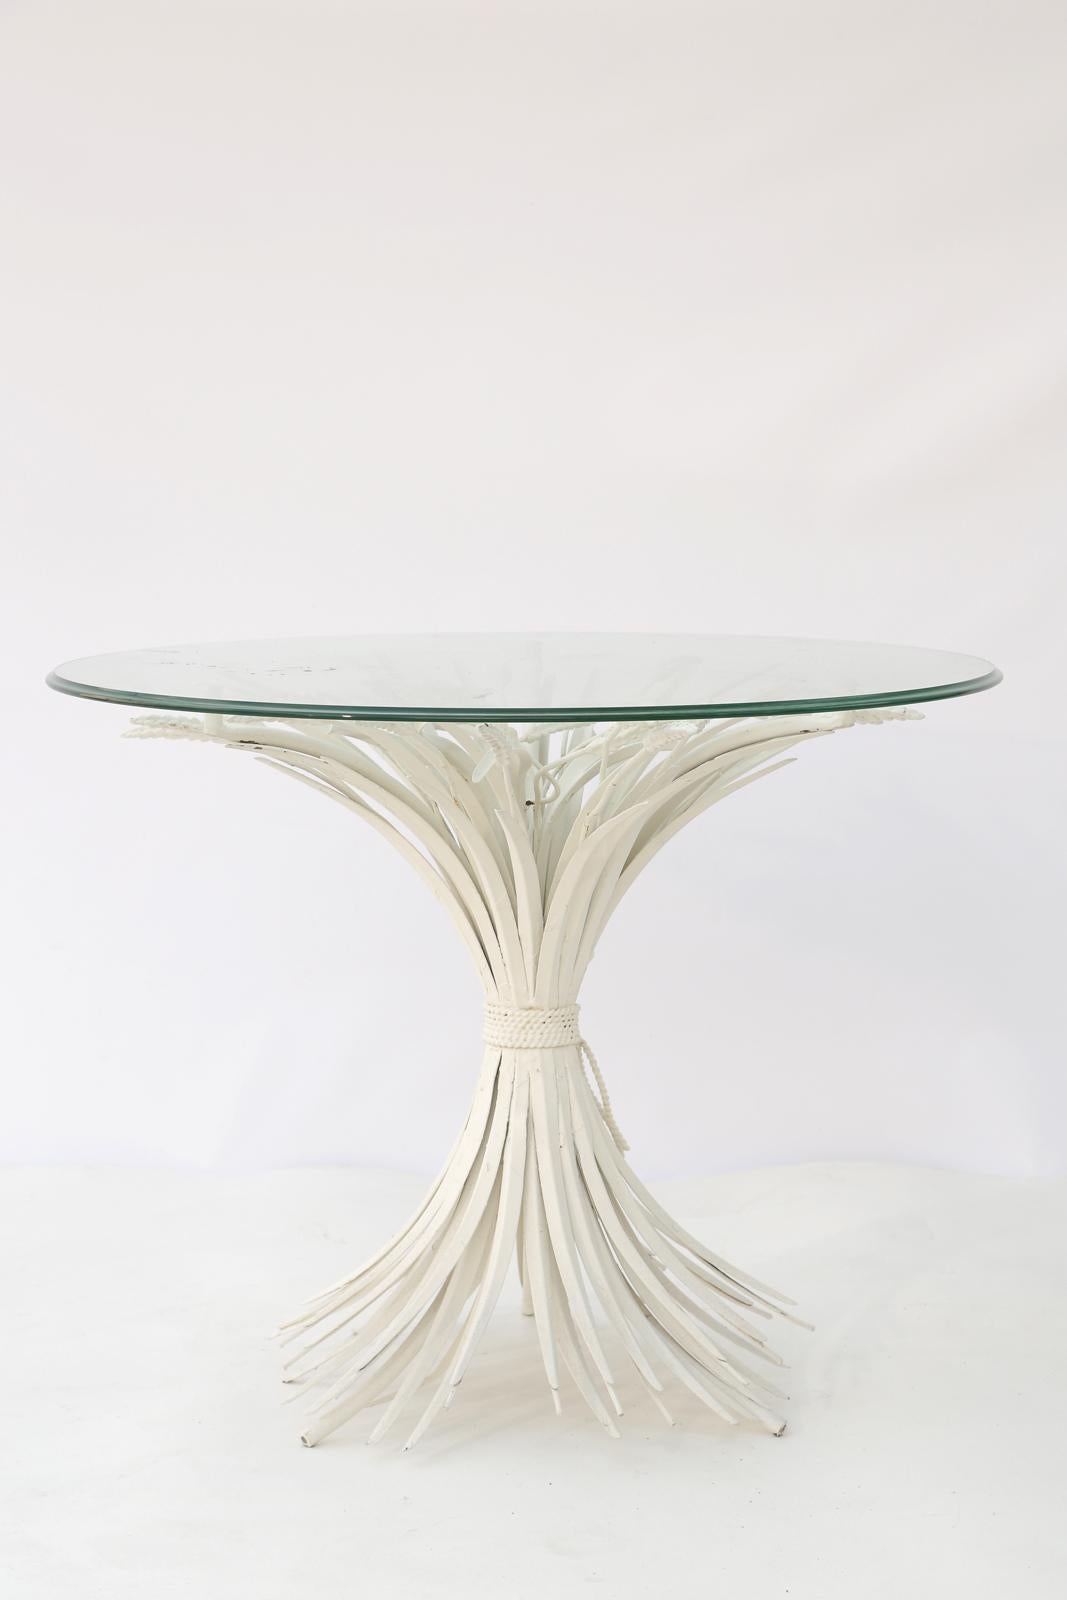 Accent table, of painted metal, in the form of a bundle of wheat, tied with rope at its middle, with round glass top. 

This classic, Hollywood Regency, the design was made popular when both Coco Chanel and Yves Saint Laurent utilized them in